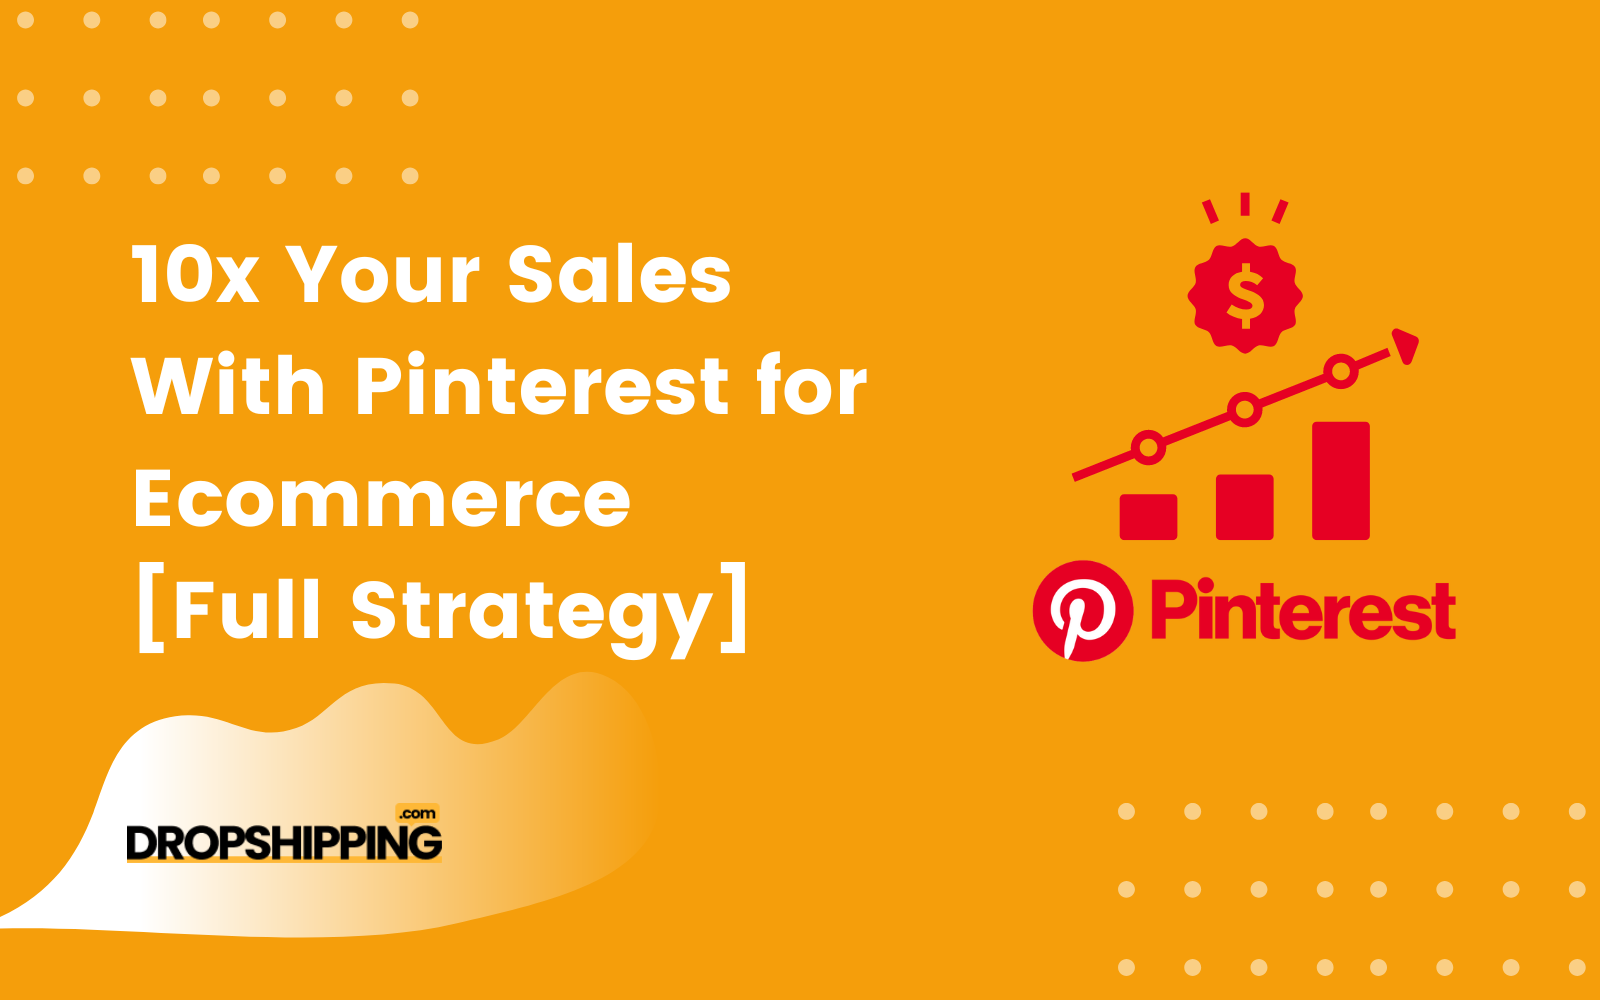 How To Sell More With Free Traffic From Pinterest for Ecommerce?